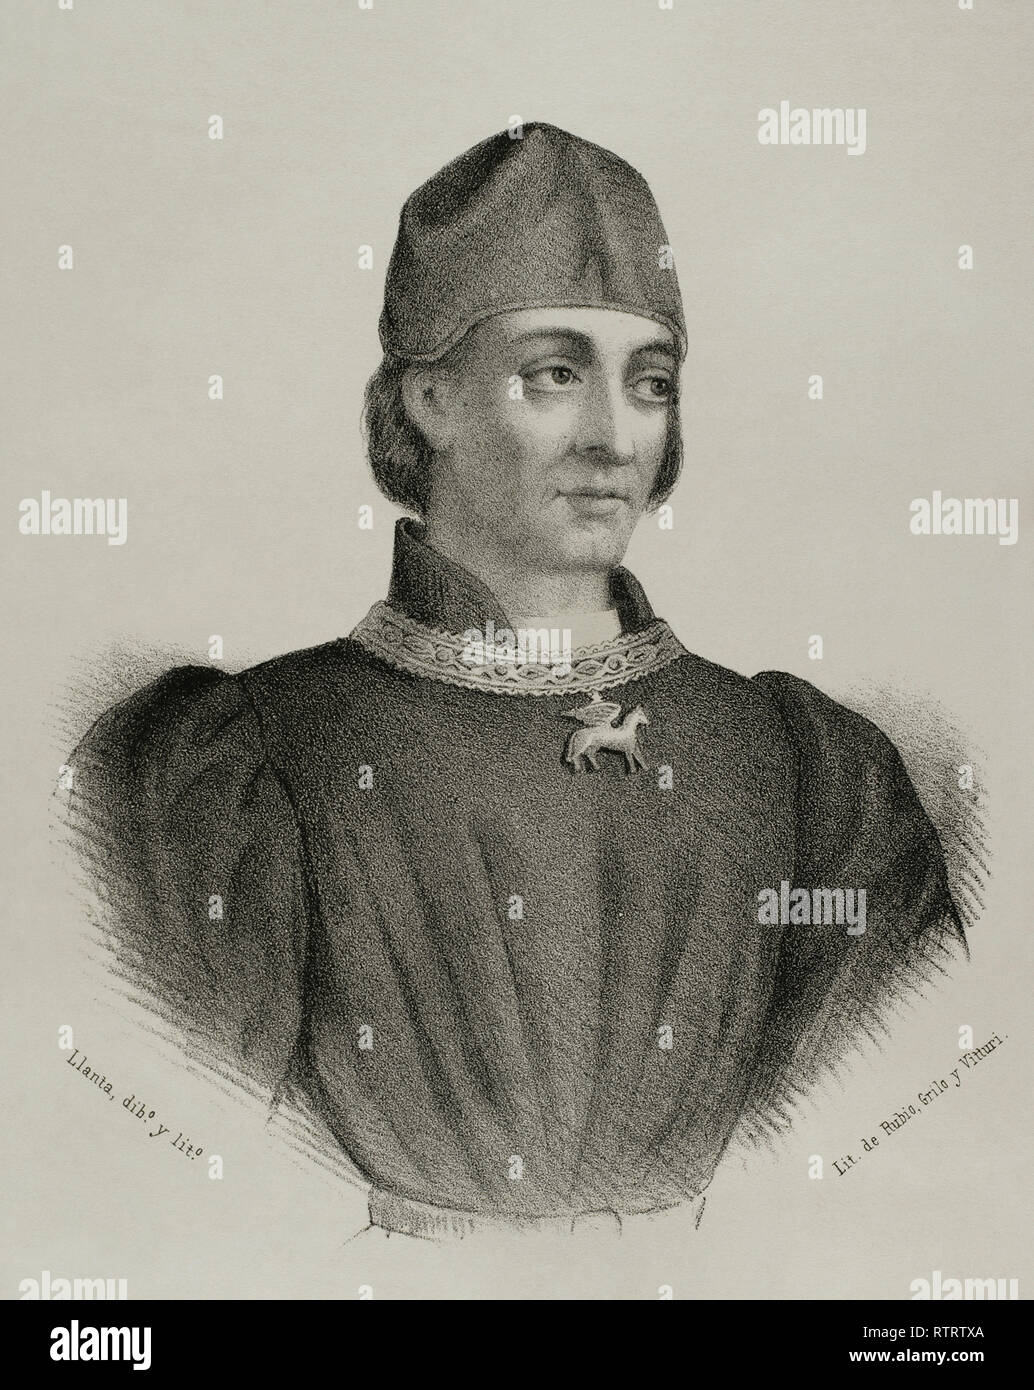 Charles, Prince of Viana (1421-1461). Infante of Aragon and Navarre, Prince of Viana and Girona, duke of Gandia and Montblanc. He was also called Charles IV of Navarre (1441-1461). Lithography. Historia Ilustrada y Descriptiva de sus Provincias. Catalonia. 1866. Stock Photo